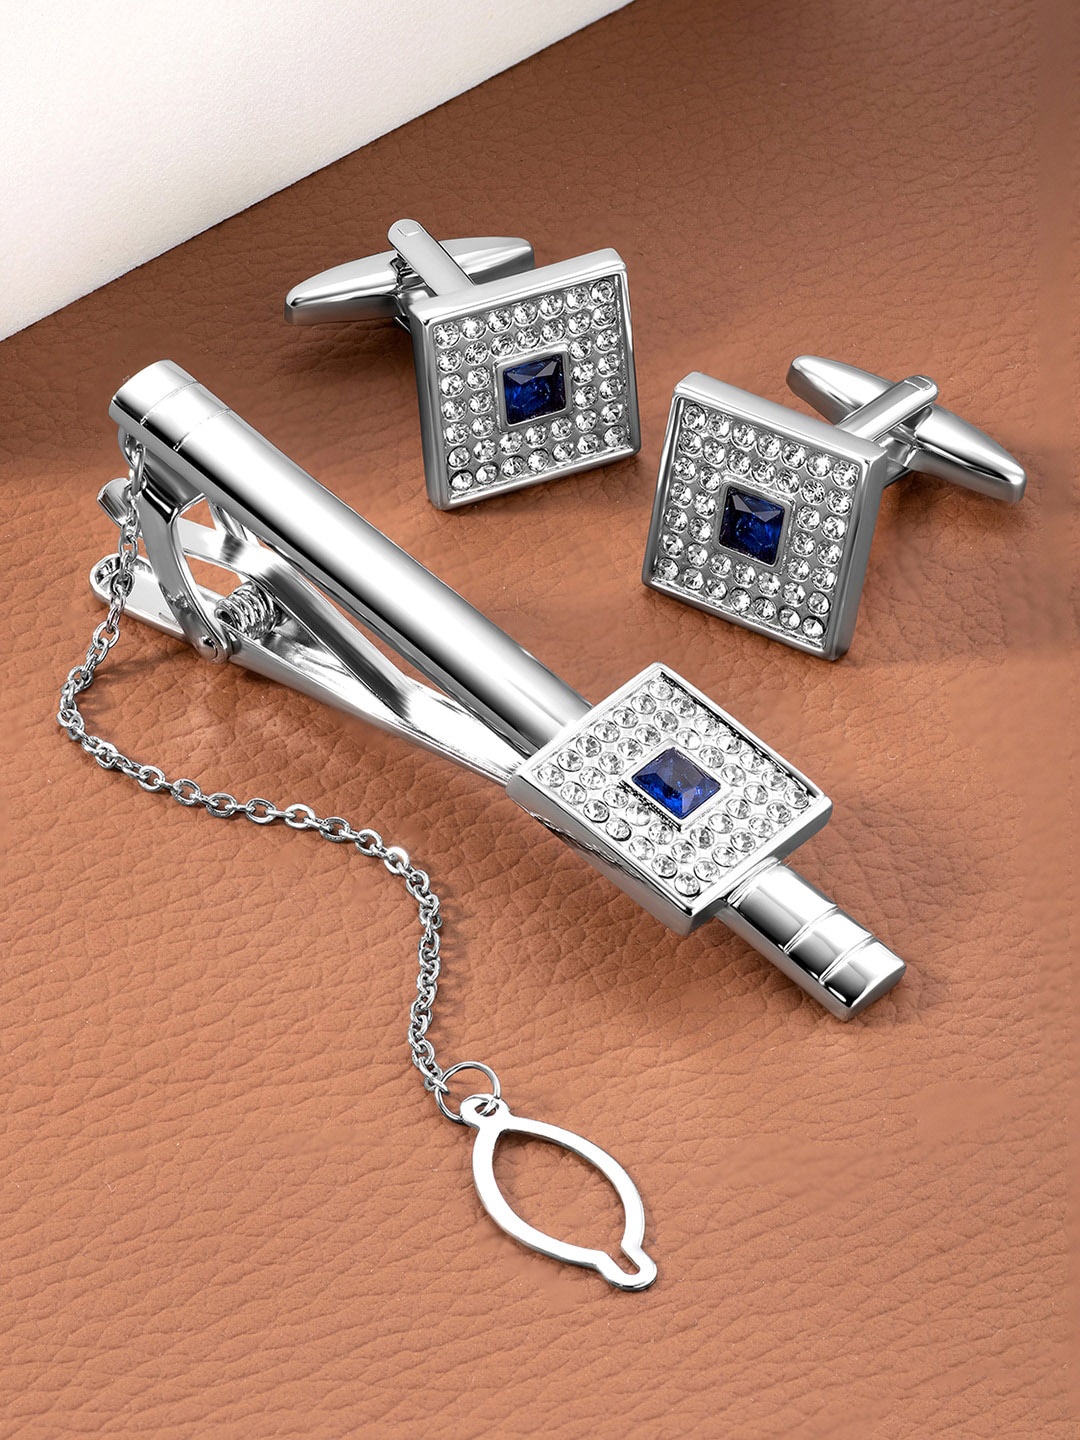 

Peora Men Silver-Plated Artificial Stones Studded Tie Pin & Cufflink Gift Set